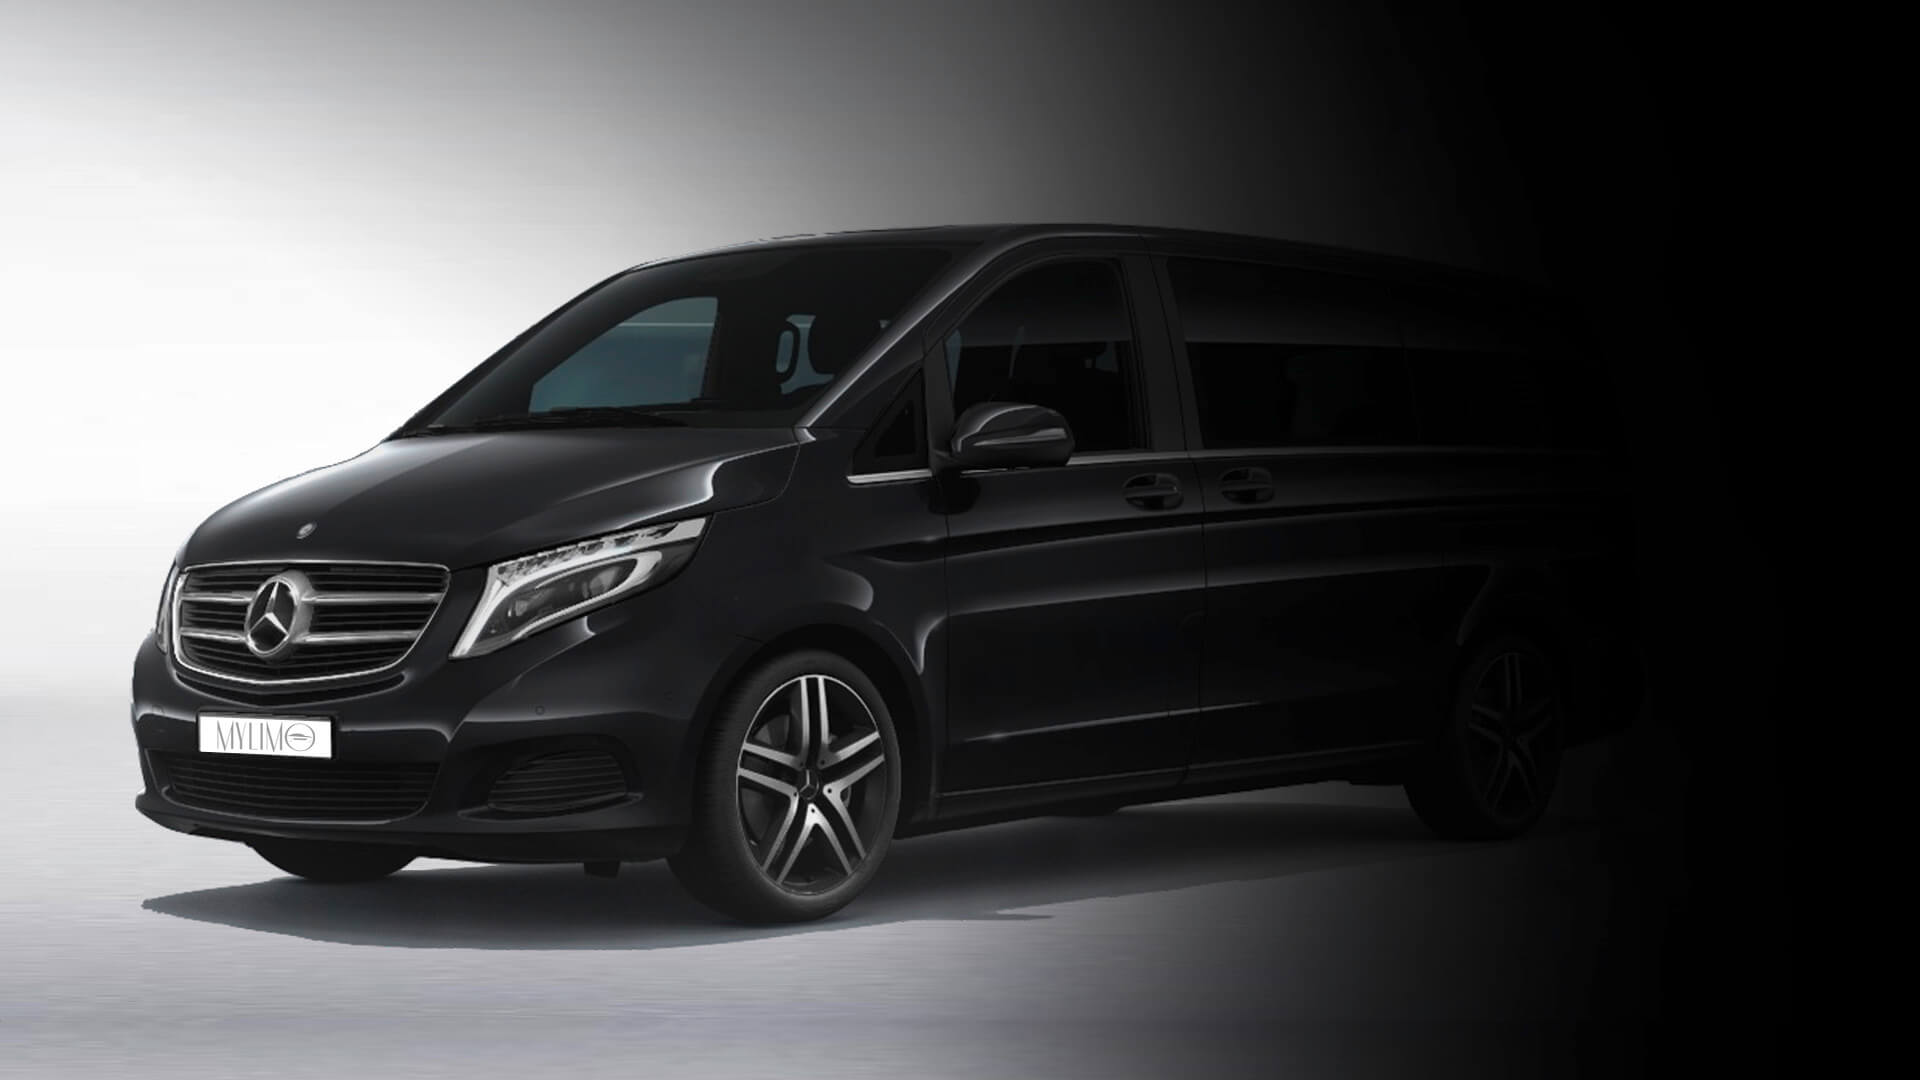 Car Service Warsaw - Limousine service Warsaw Poland - limo hire in Warsaw